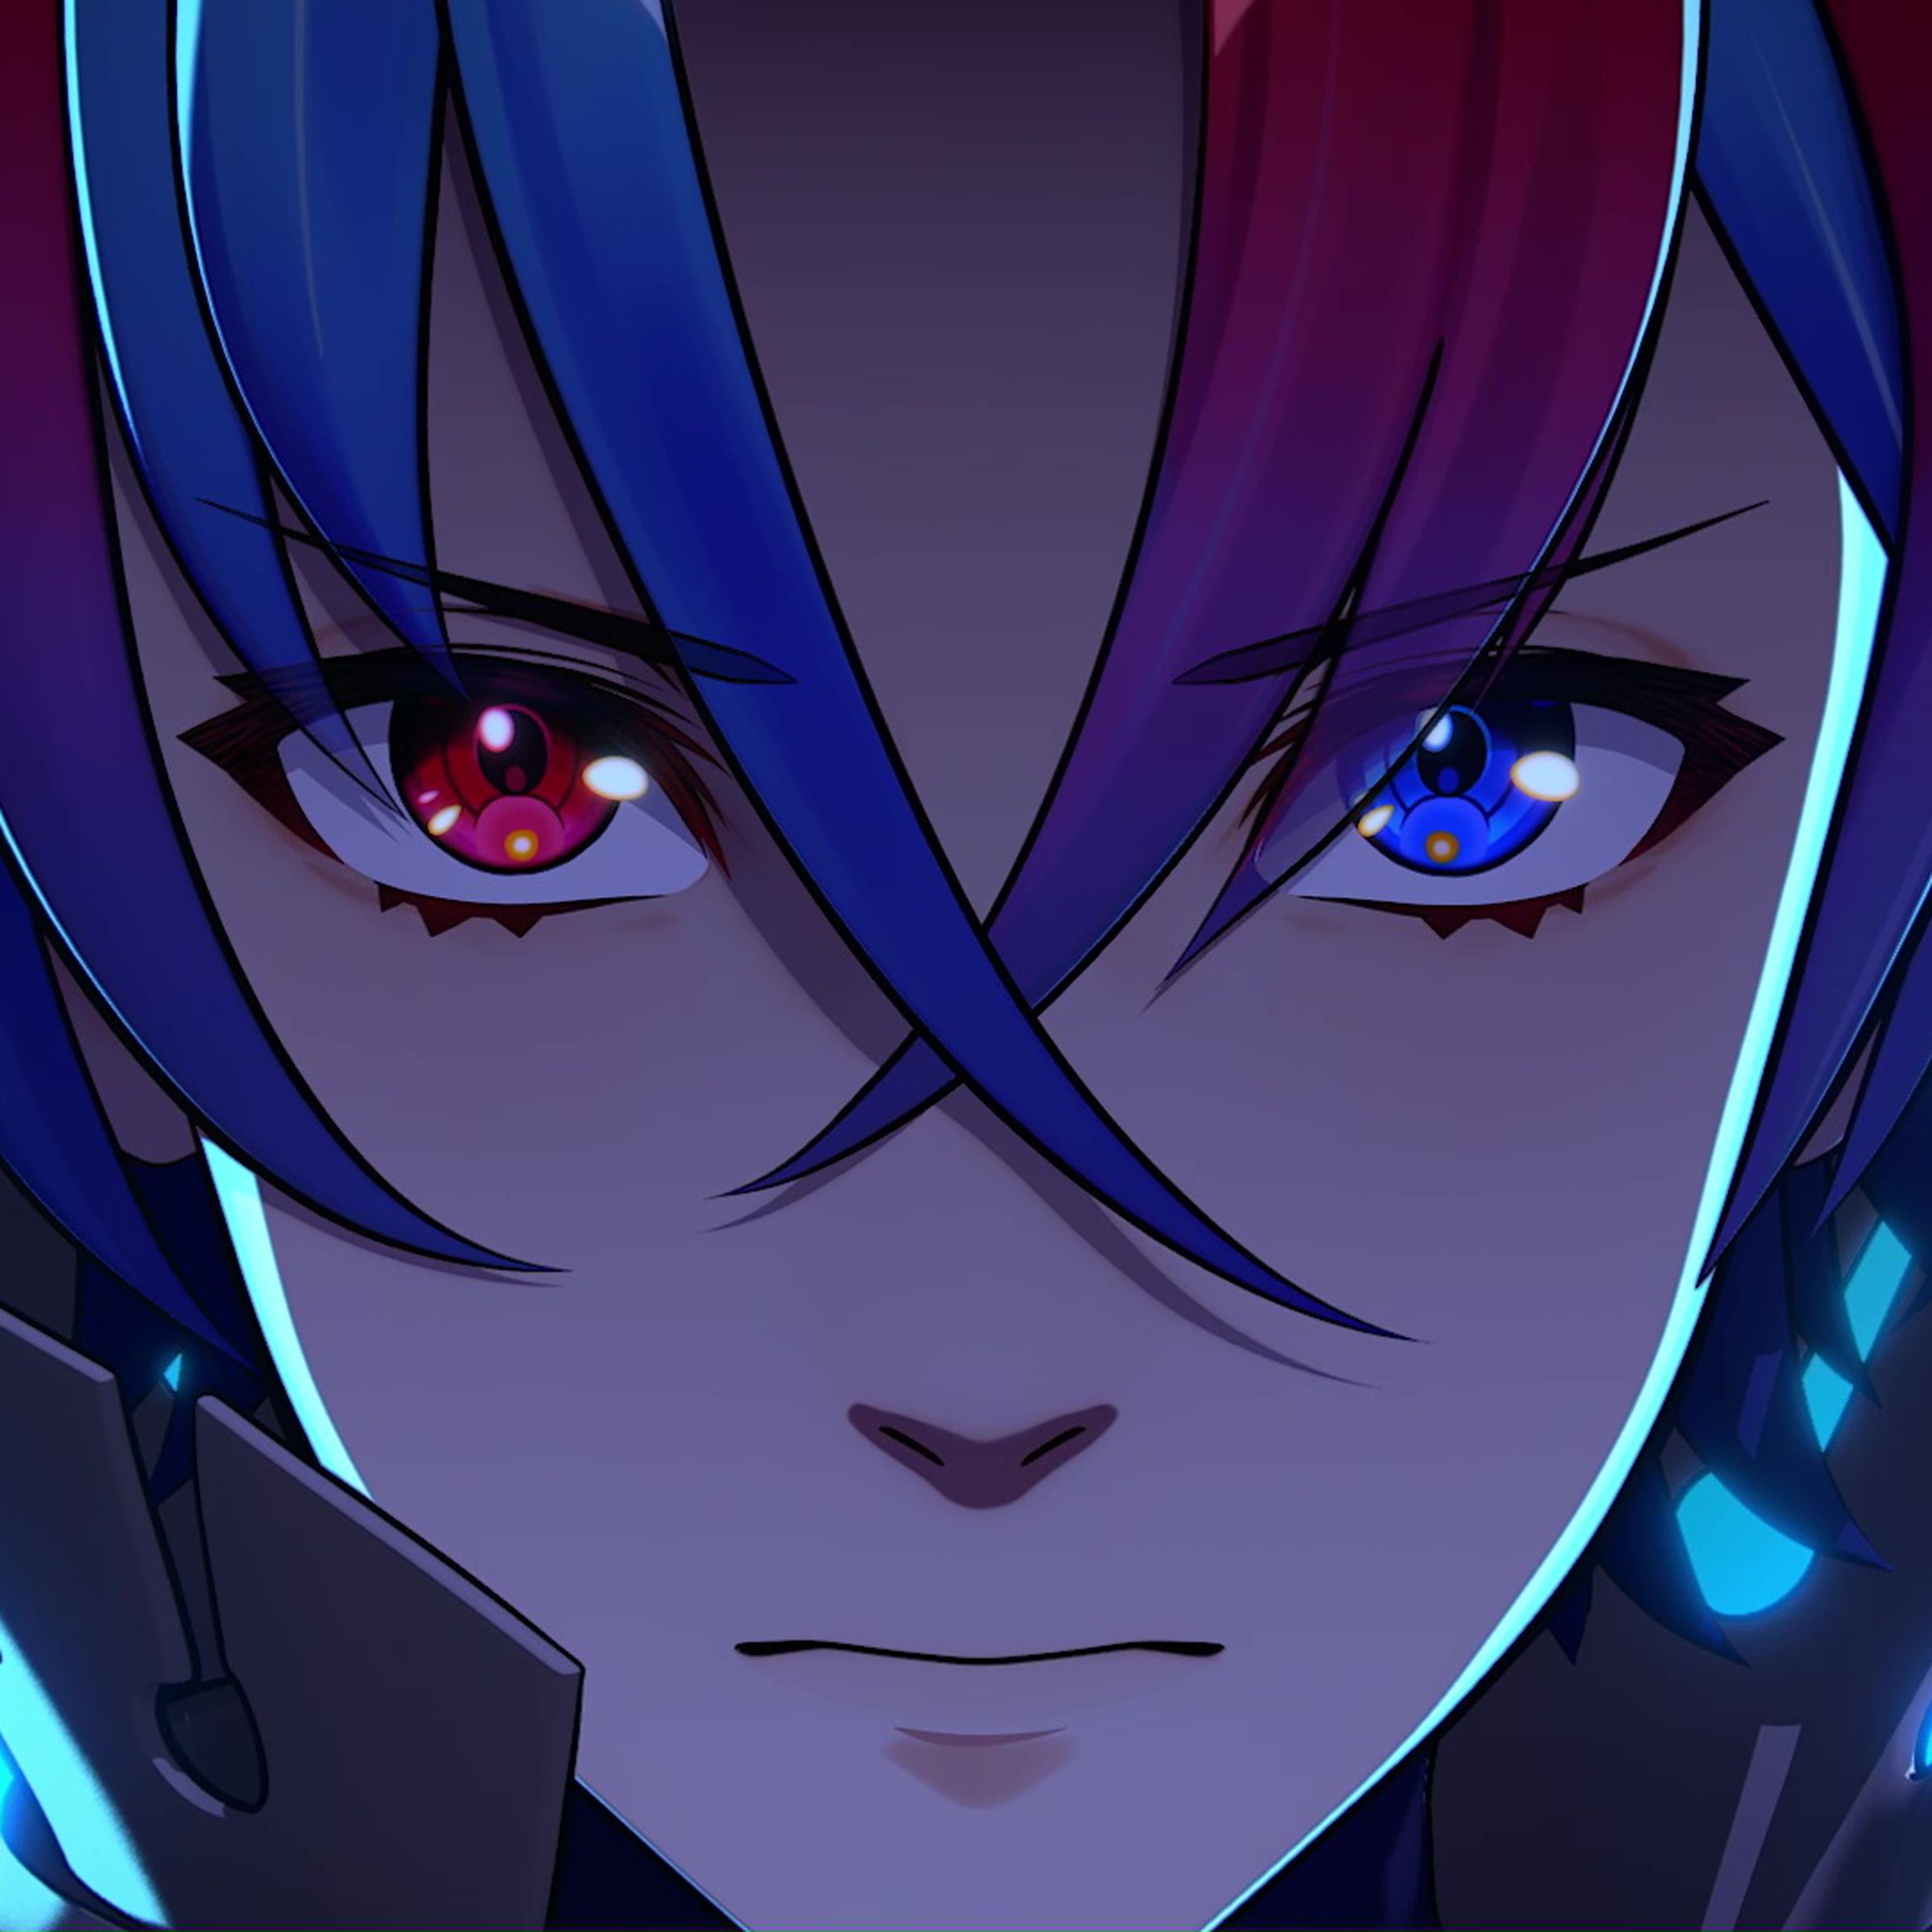 Screenshot from Fire Emblem Engage’s story trailer featuring a close-up of the protagonist, Alear, who has red- and blue-colored eyes and hair.